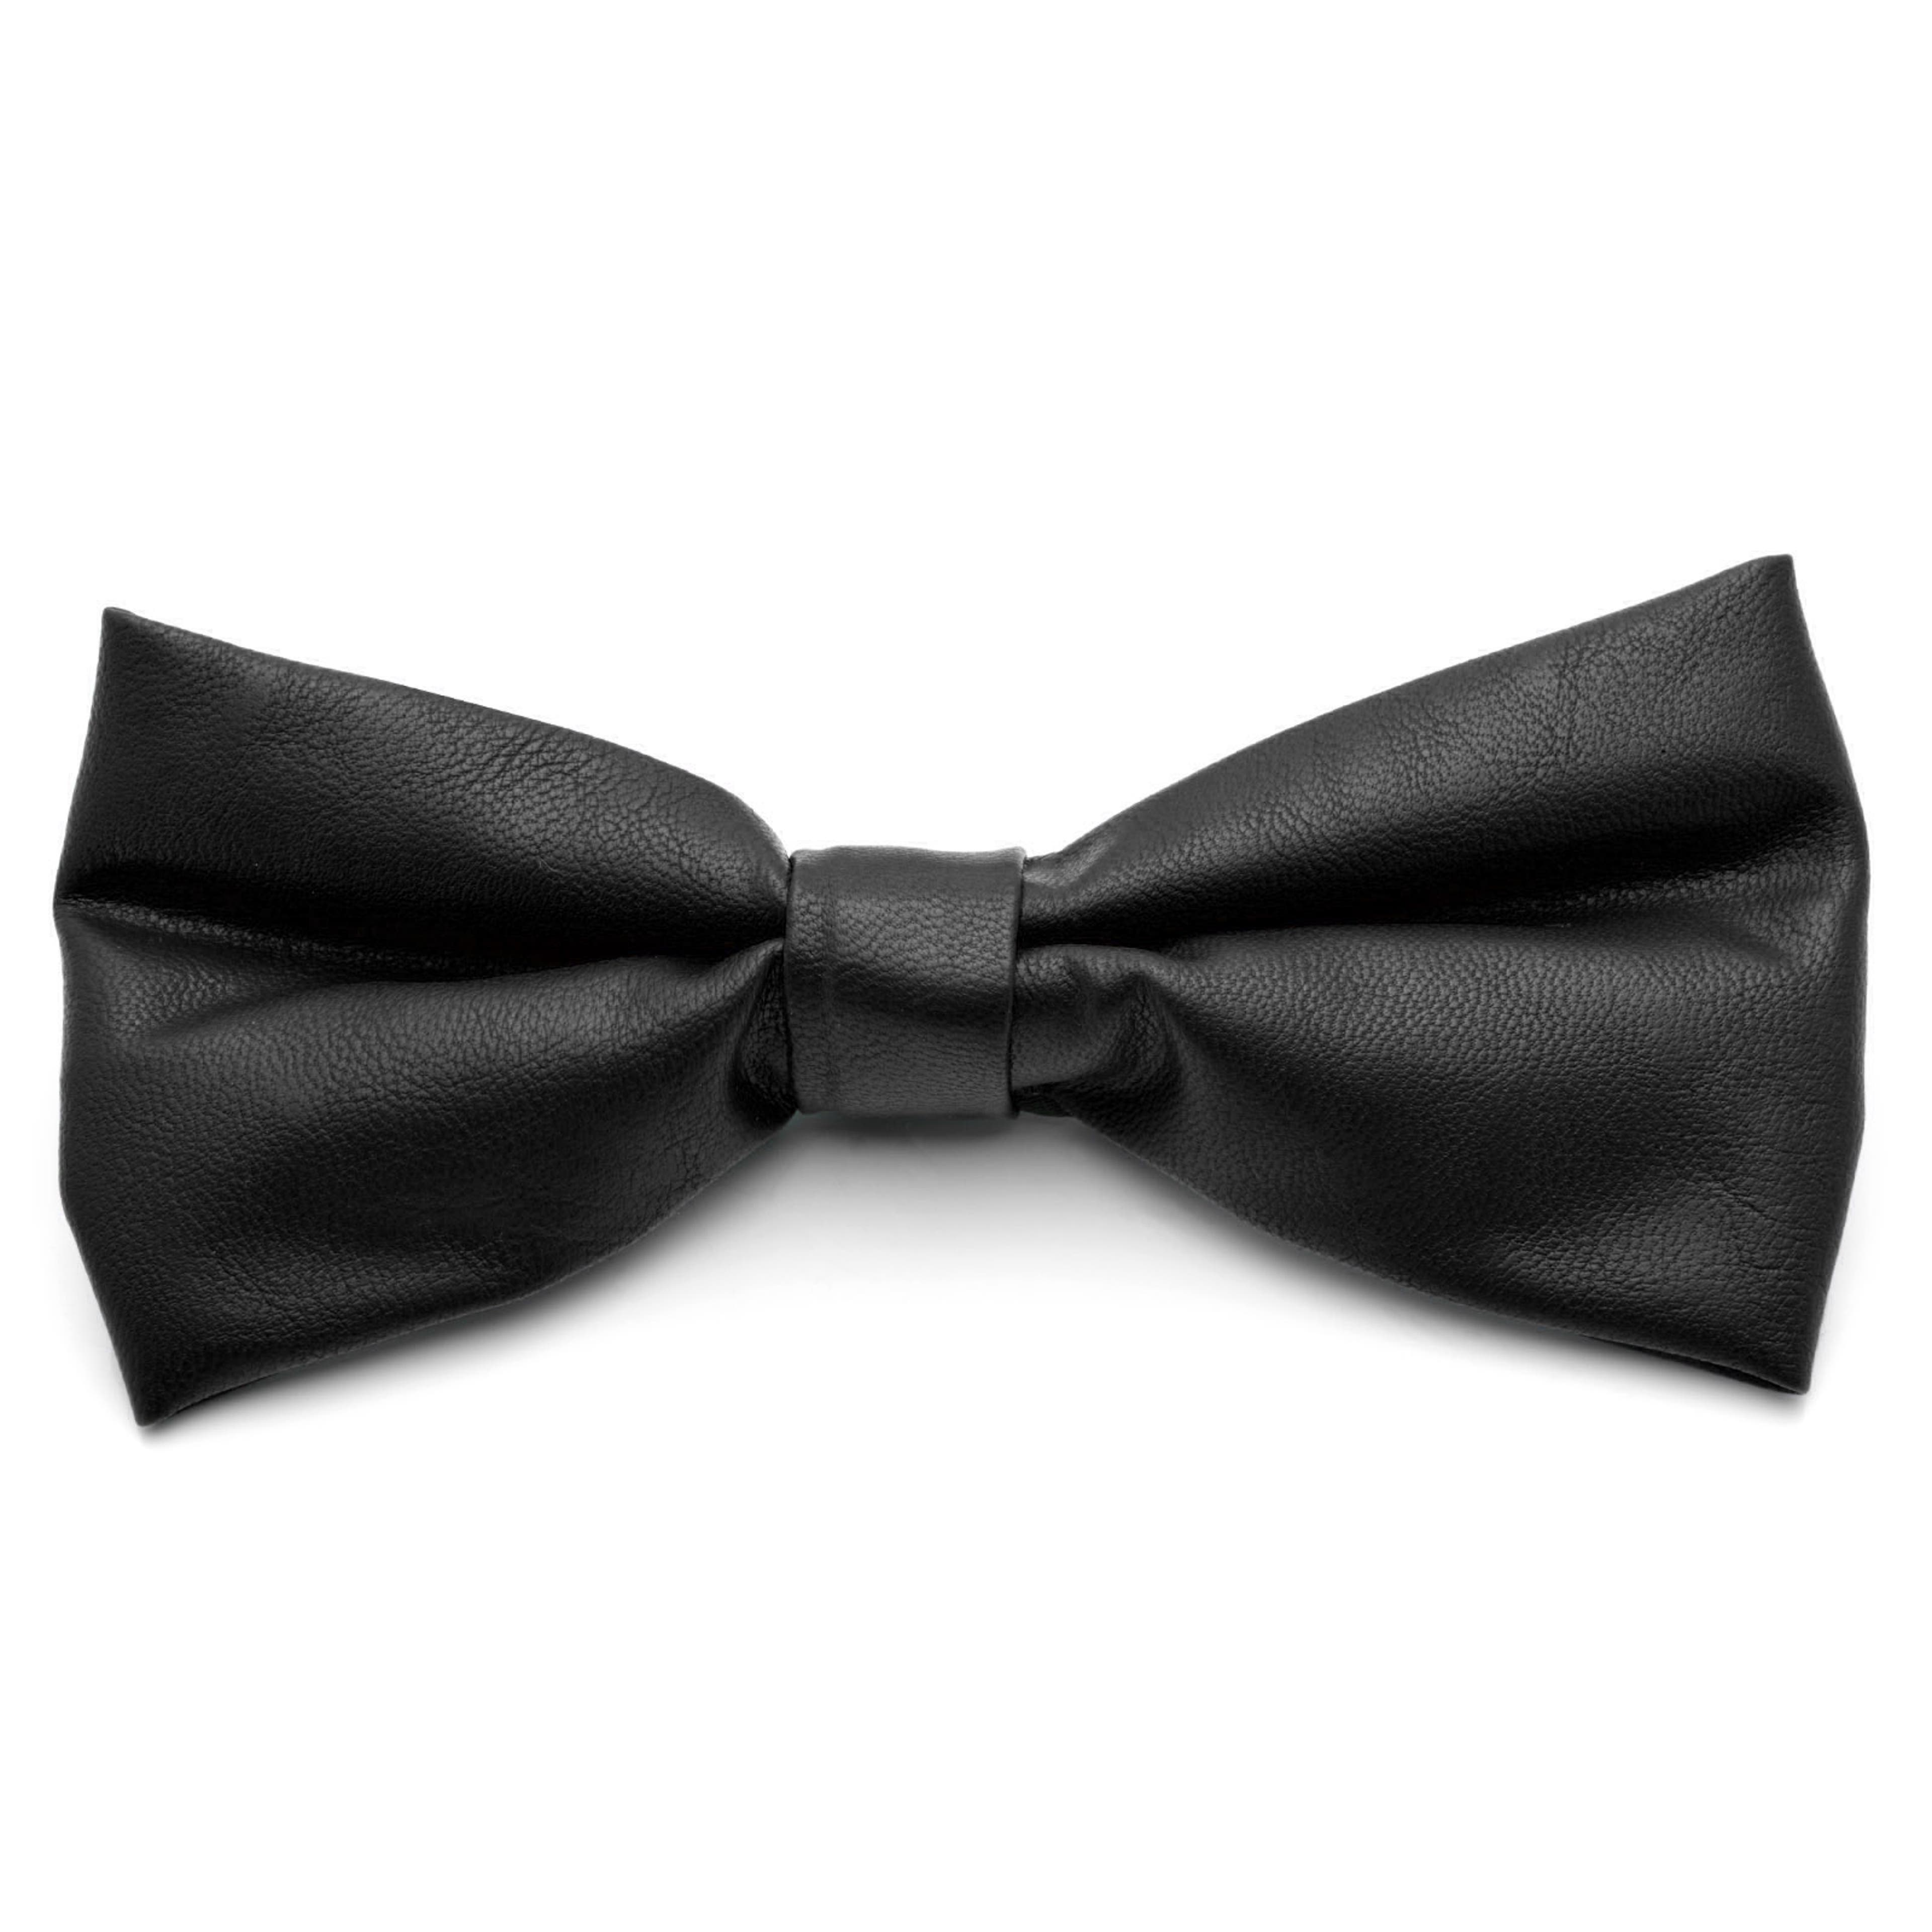 Black Faux Leather Pre-Tied Bow Tie